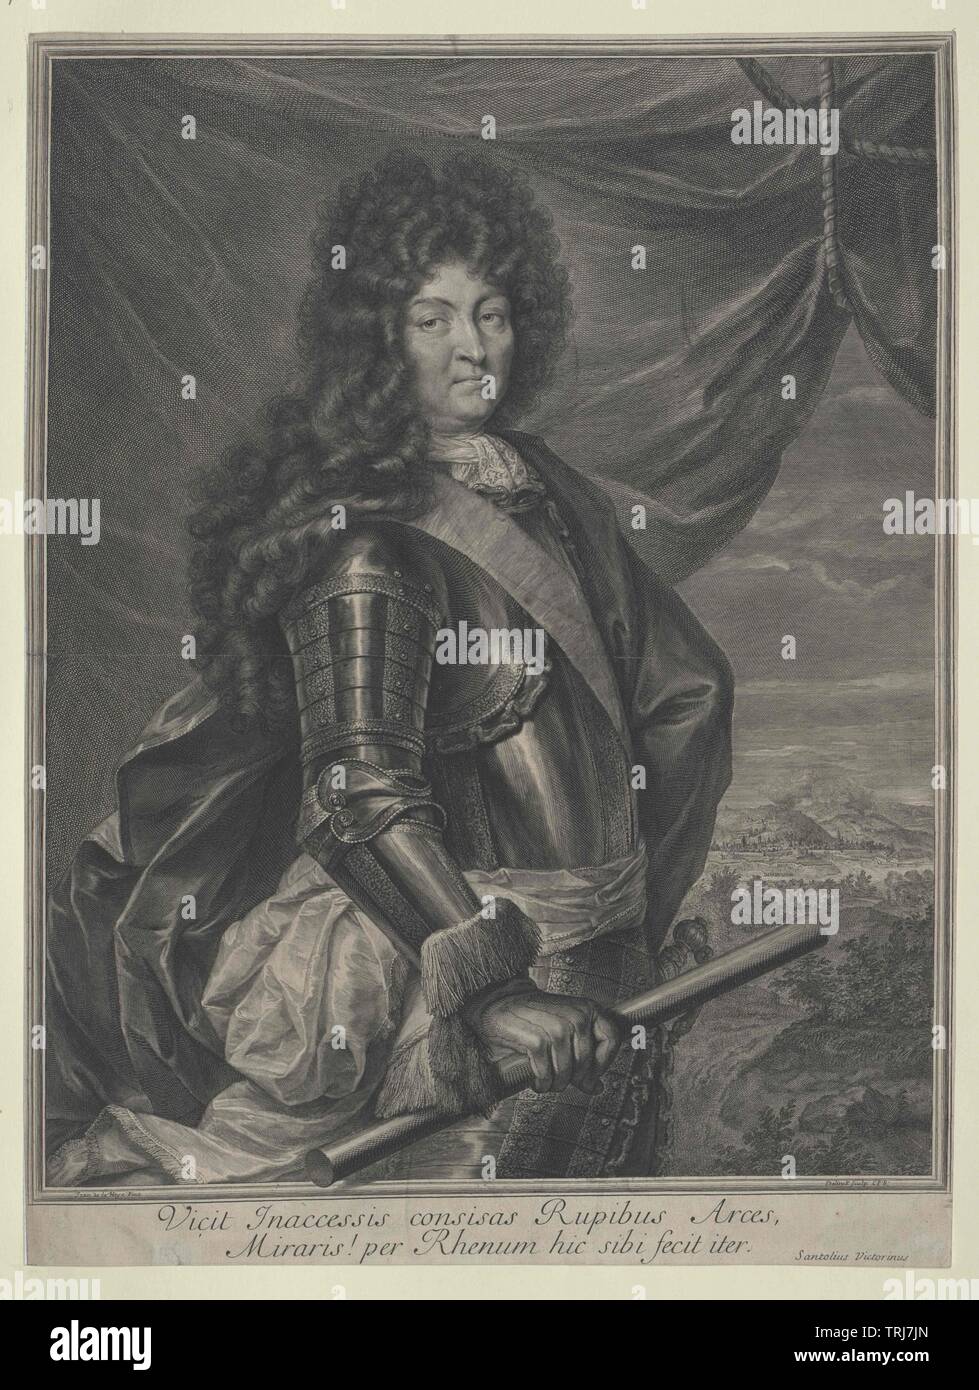 Louis XIV, King of France, painting by Karl de La Haye, portrayed in a engraving by Gerard Edelinck, Additional-Rights-Clearance-Info-Not-Available Stock Photo